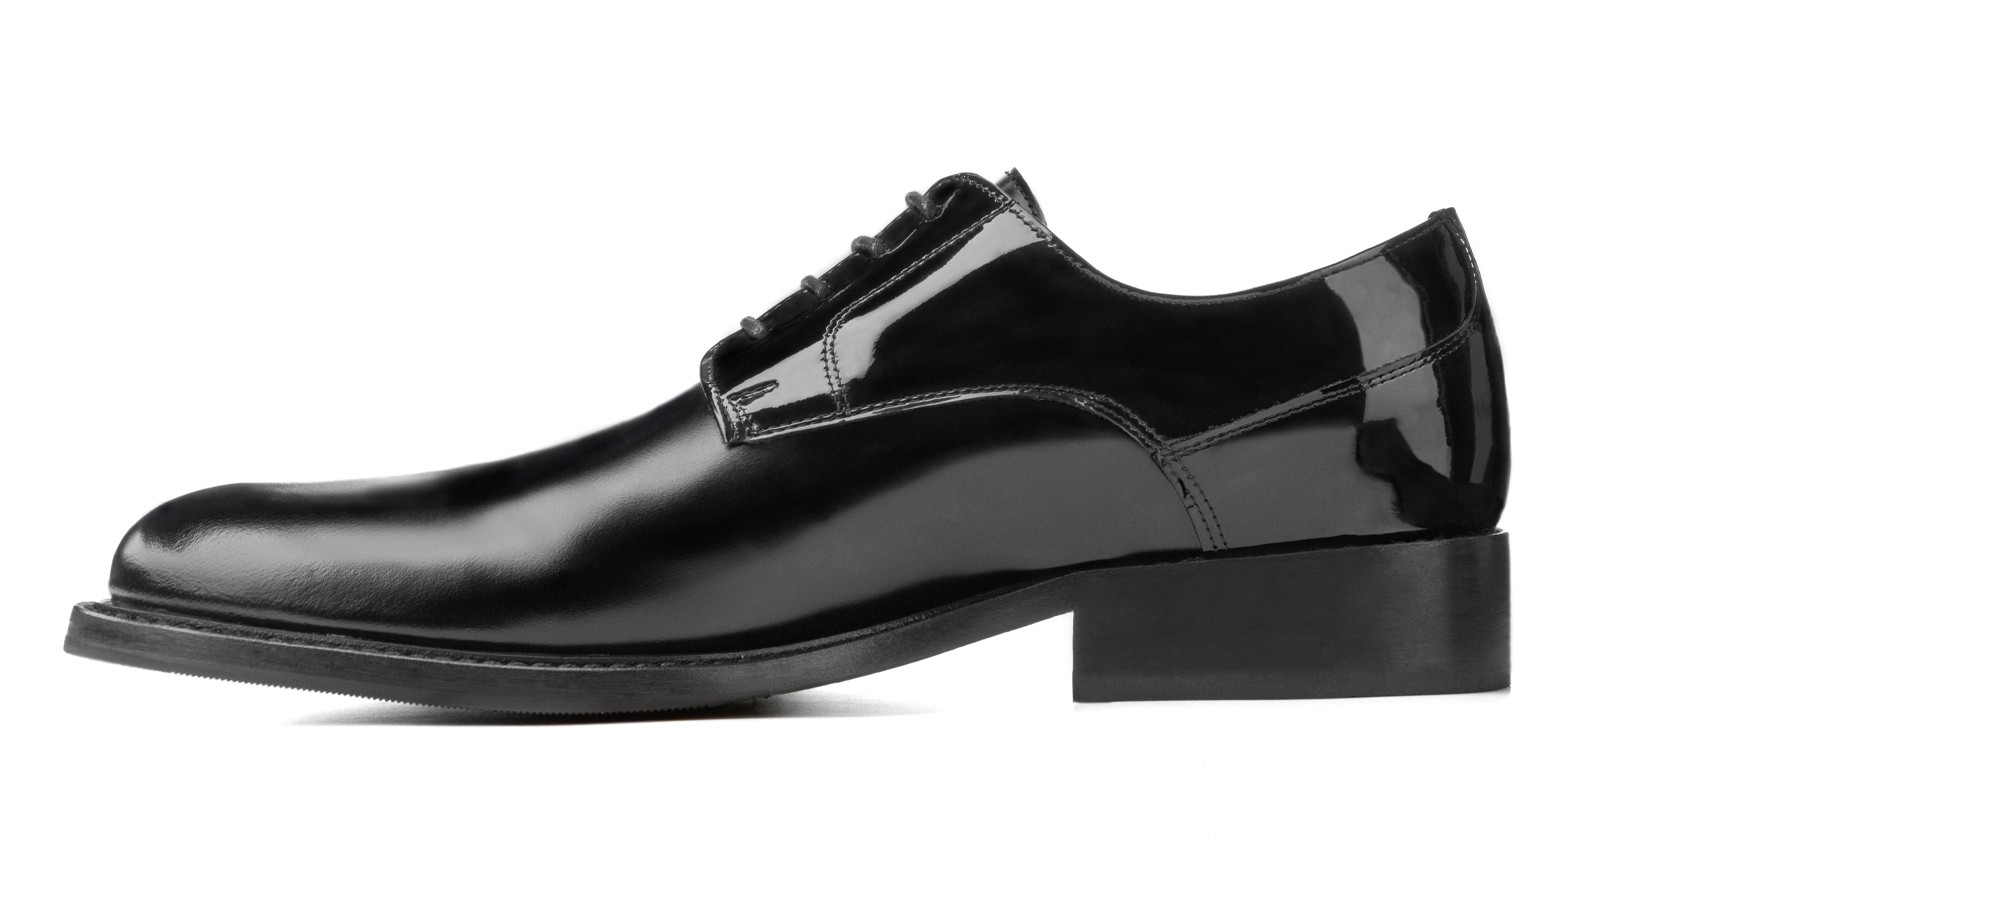 Belleville - Elevator Dress Shoes in Brushed Leather from 2.4 to 3.1 inches